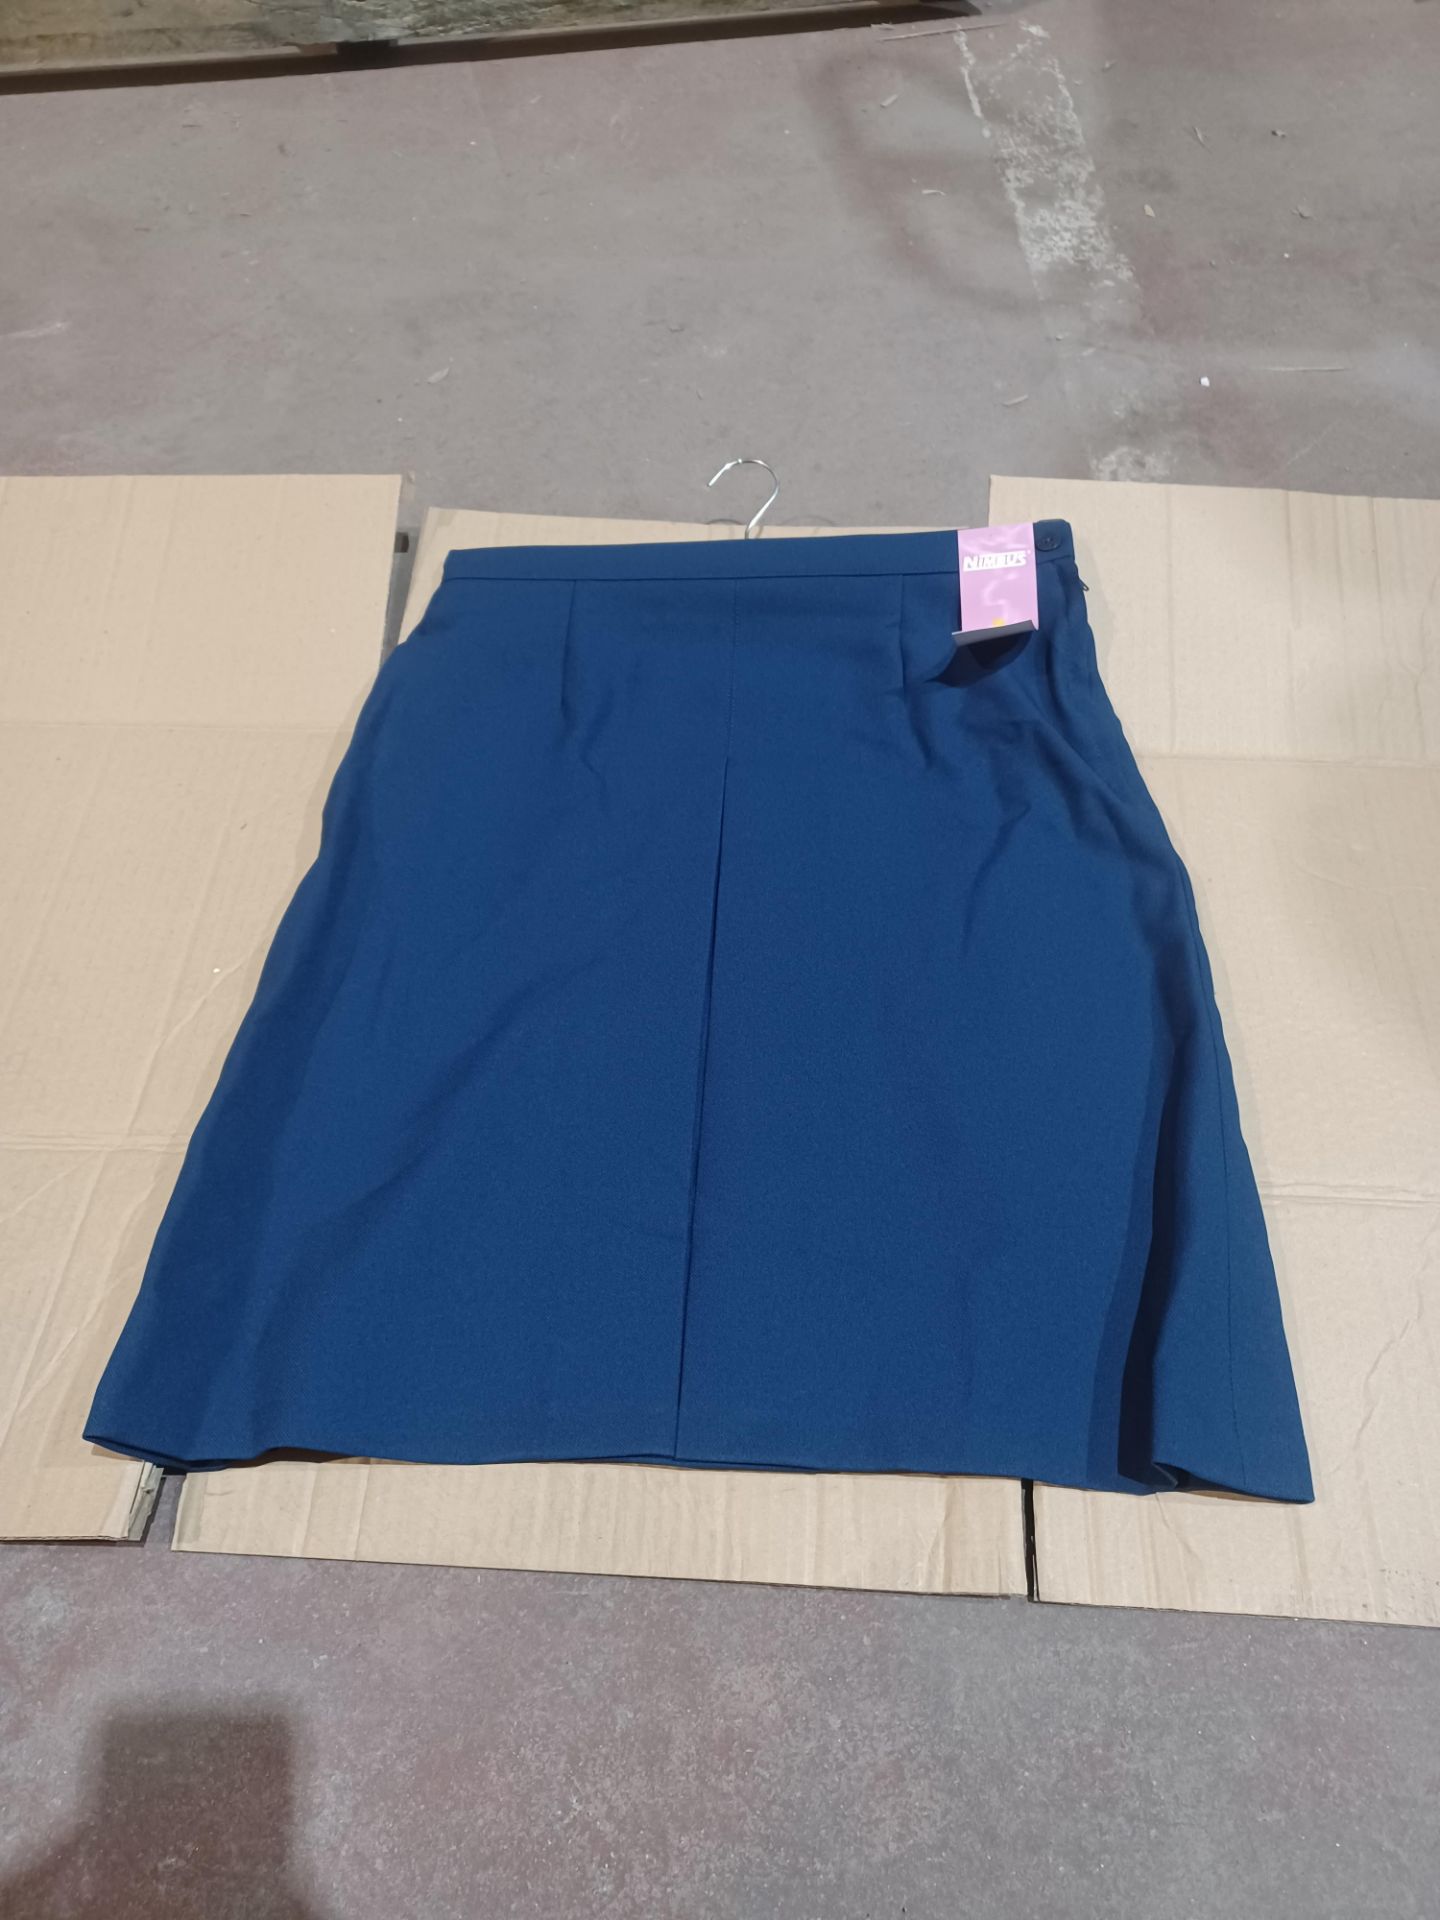 47 x Deluxe Nimbus Blue Skirts in Various Sizes. RRP £15.84 each. - R14